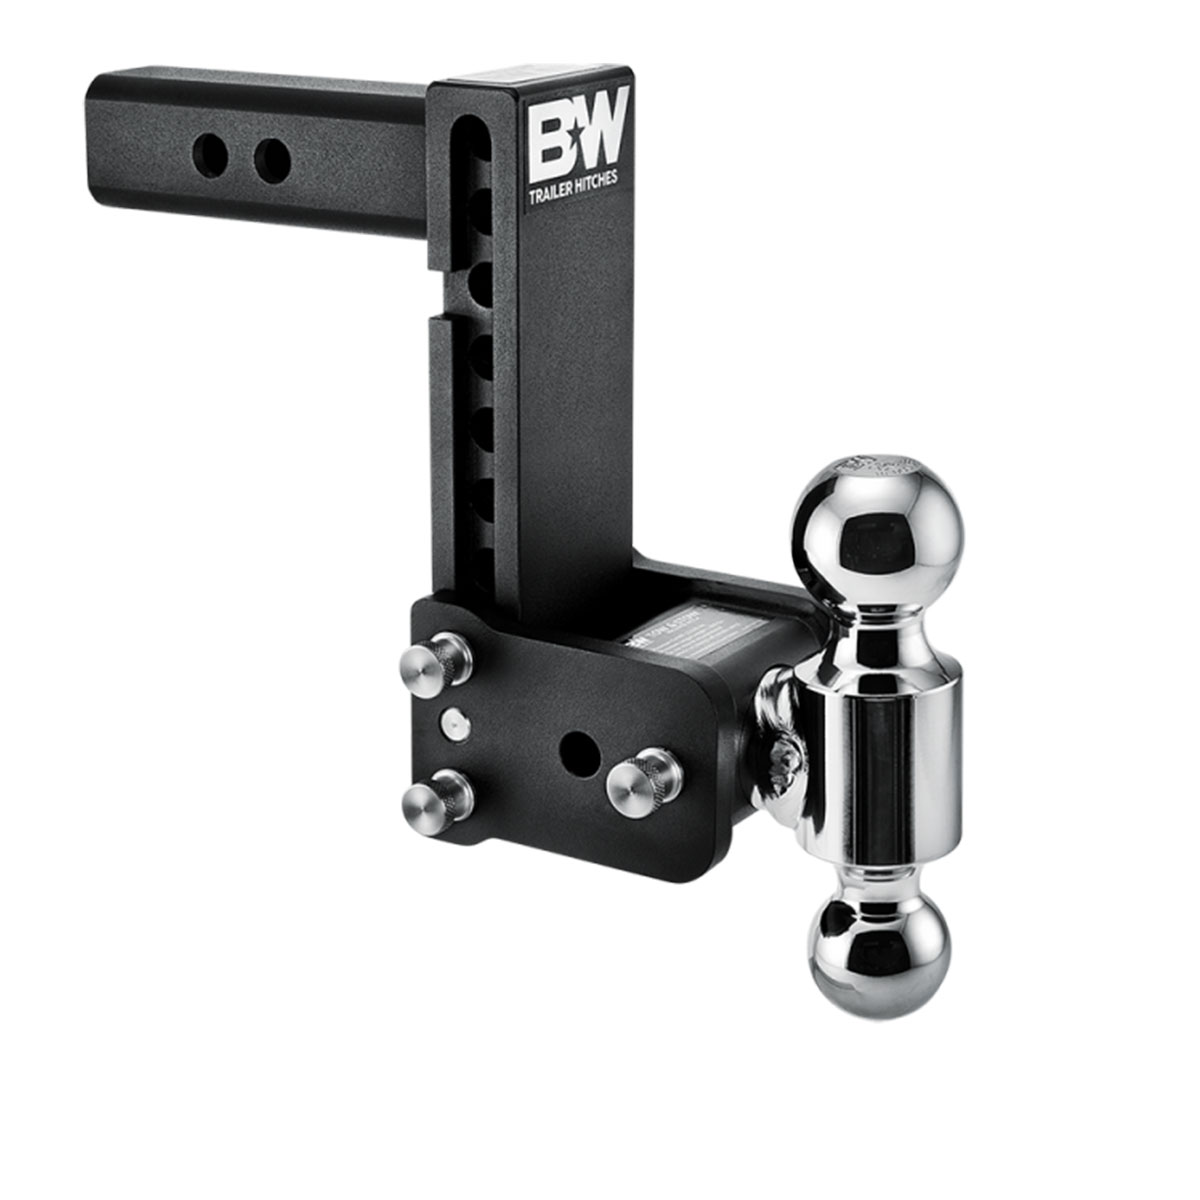 Tow & Stow Hitch for 2" Receiver, 7" Drop - 7.5" Rise